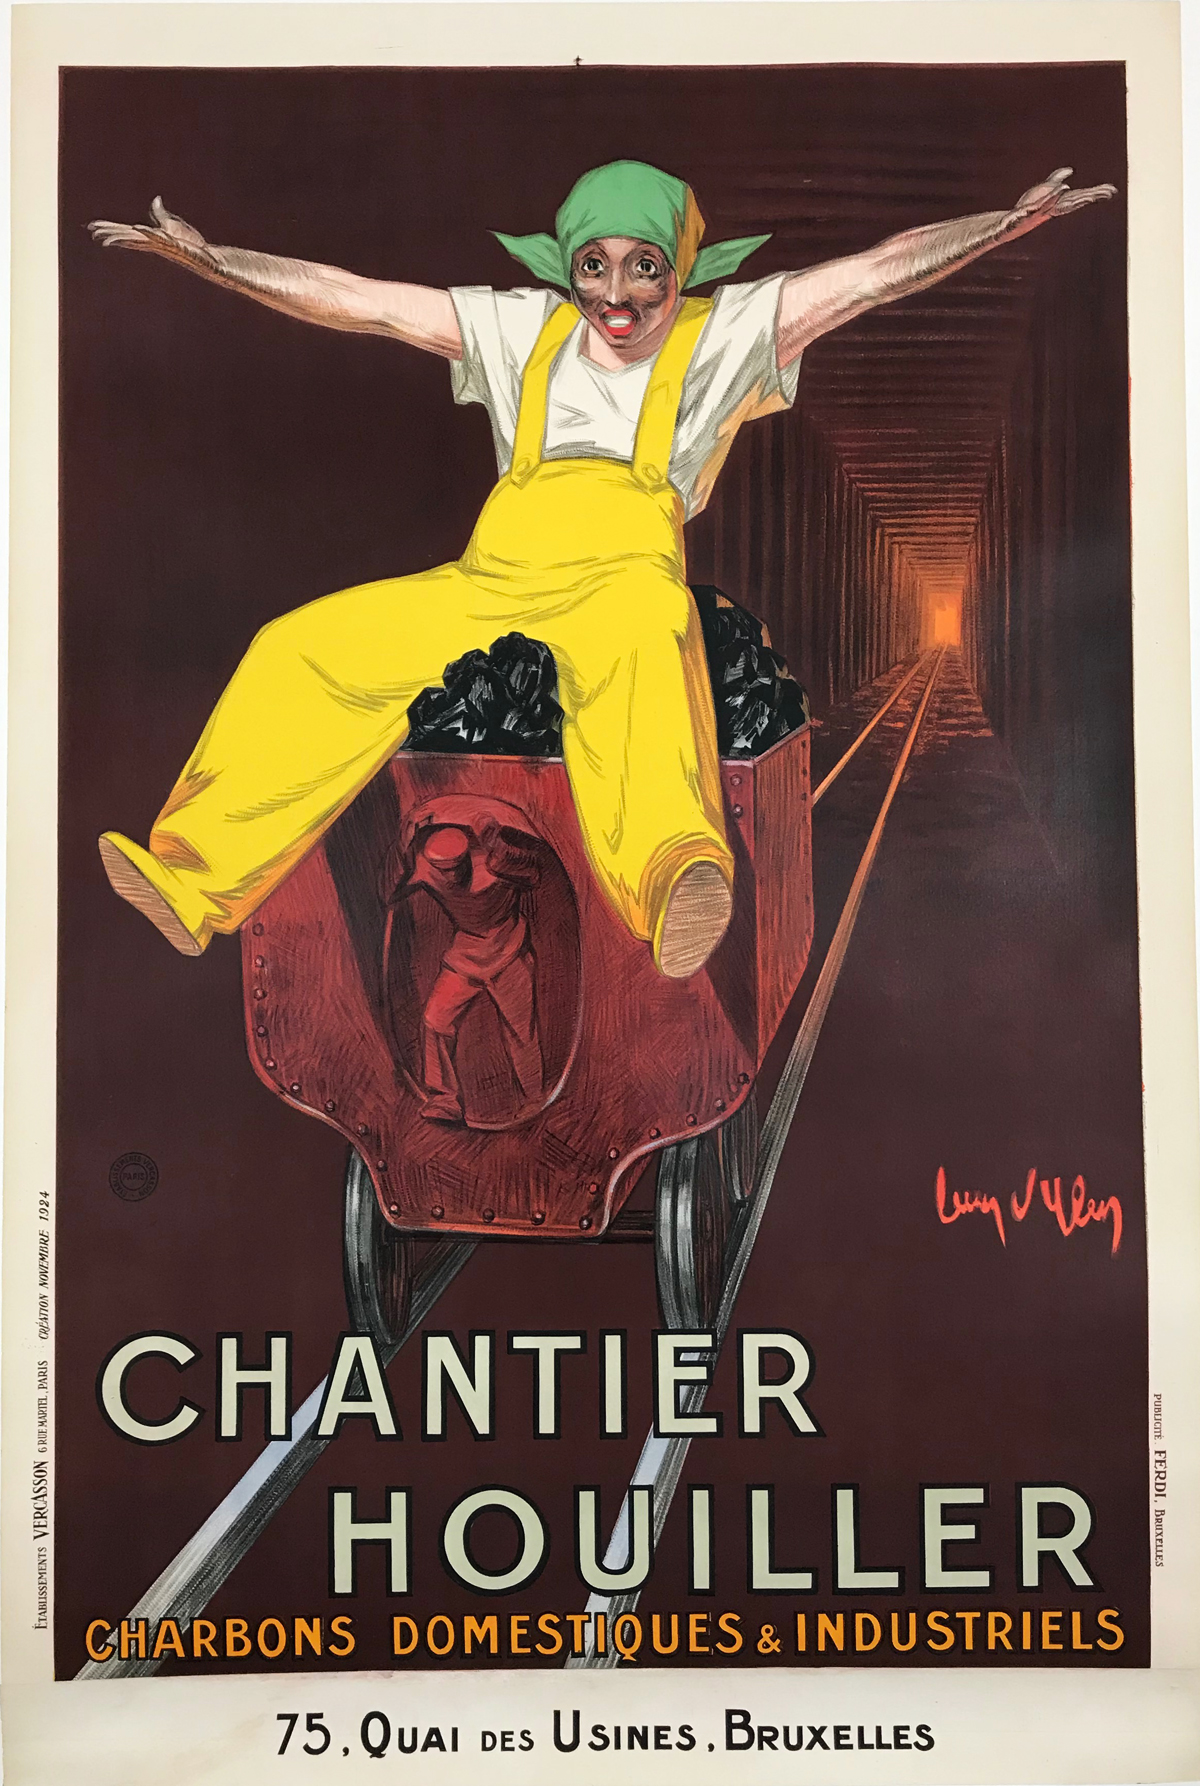 Chantier Houiller by Jean D'Ylen Original 1924 Vintage French Coal Supplier Advertisement Stone Lithograph Poster Linen Backed.